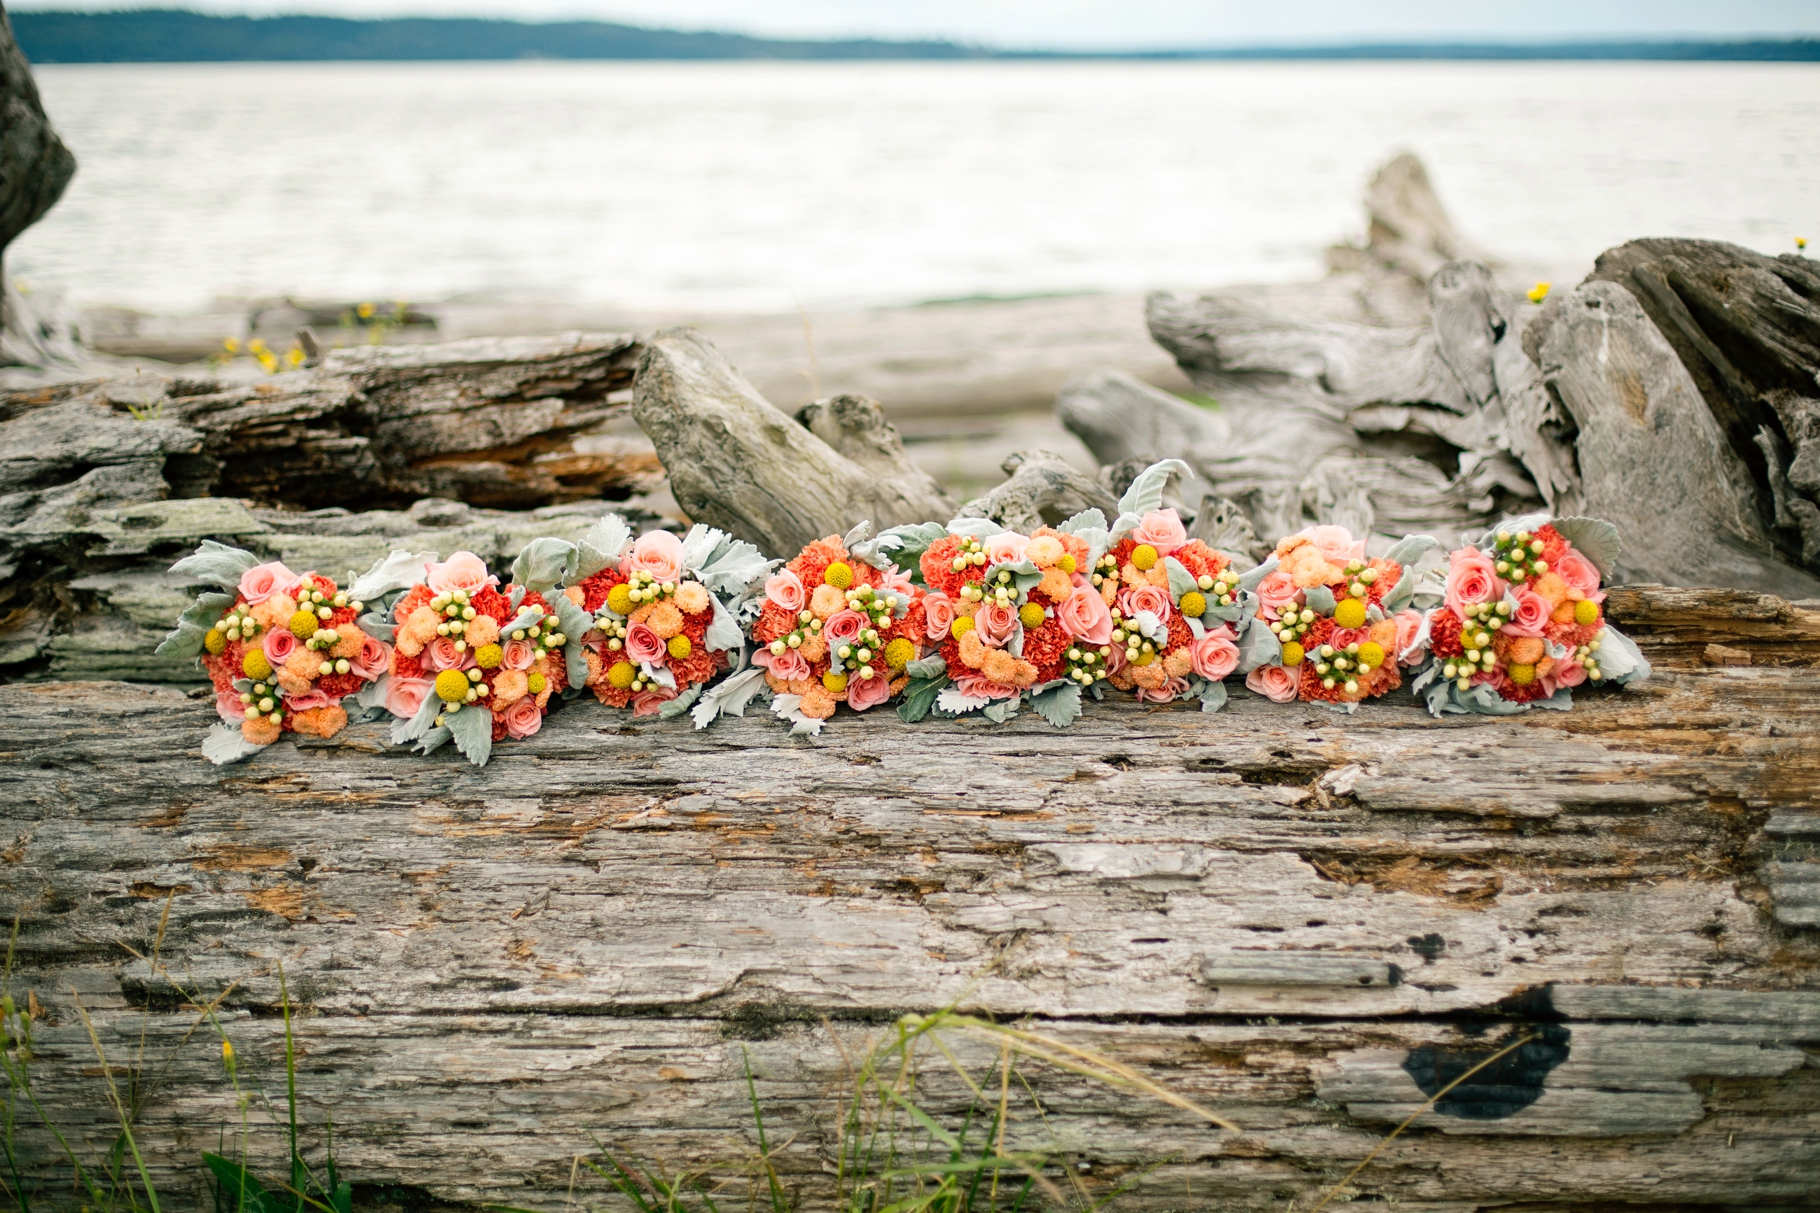 18-Bridesmaid-Bouquets-Colorful-Dusty-Miller-Love-Blooms-Events-Florist-Waterfront-Pudget-Sound-Driftwood-Normandy-Cove-Beach-Wedding-Photographer-Bride-Groom-Seattle-Wedding-Photography-Northwest